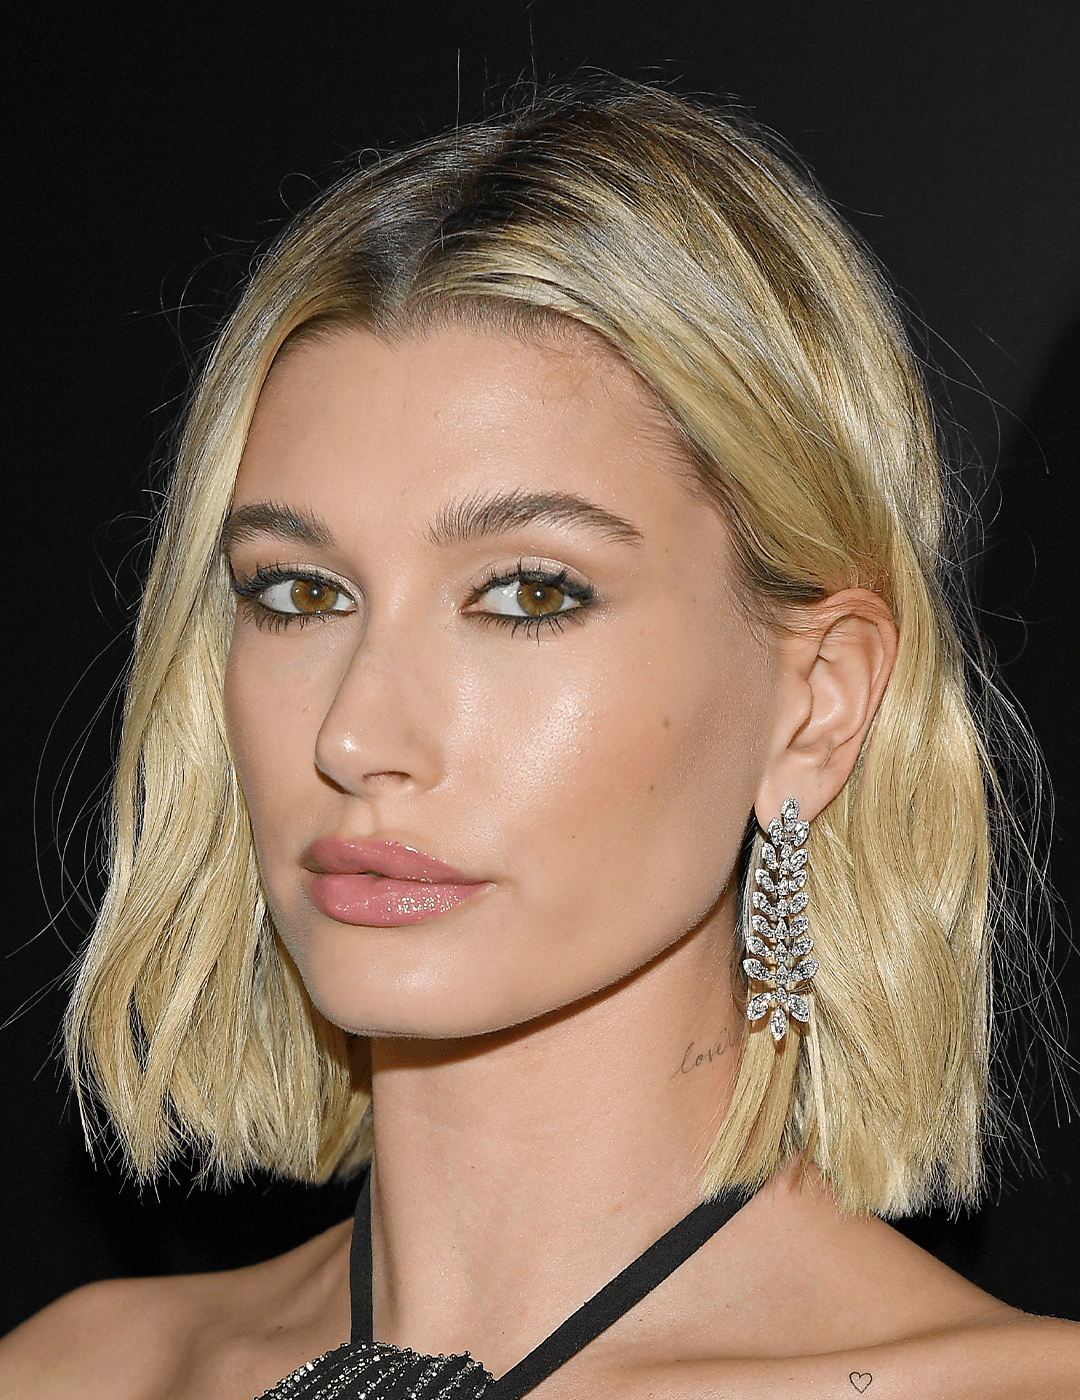 Hailey Bieber rocking a bob hairstyle, neutral makeup look, and dangling diamond earrings